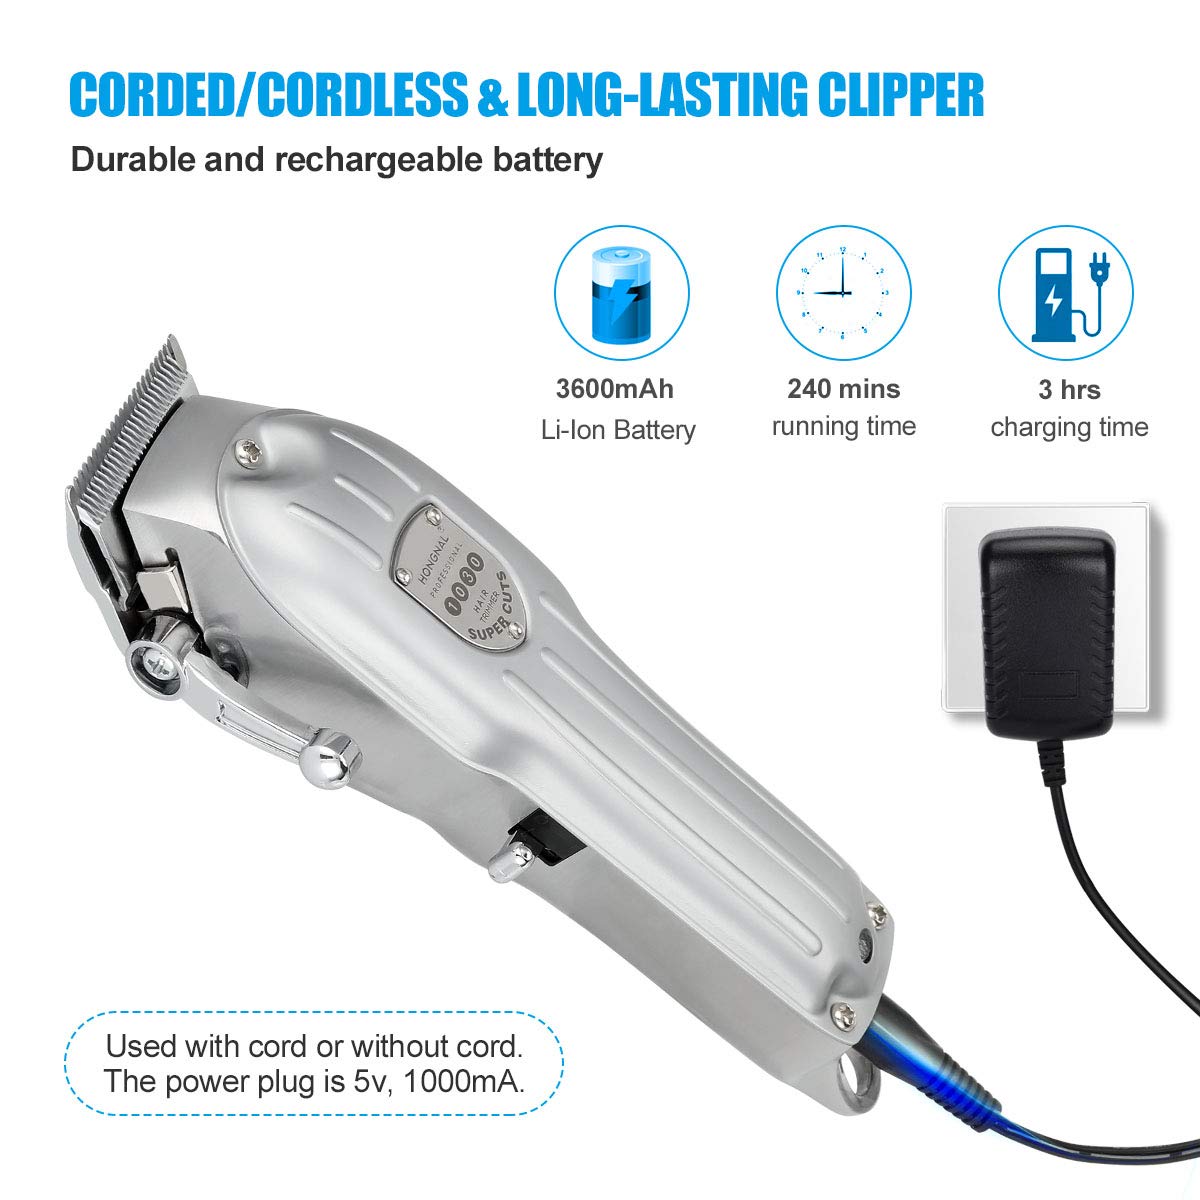 3600mAh Cordless Hair Clippers Stainless Steel Housing - 1 